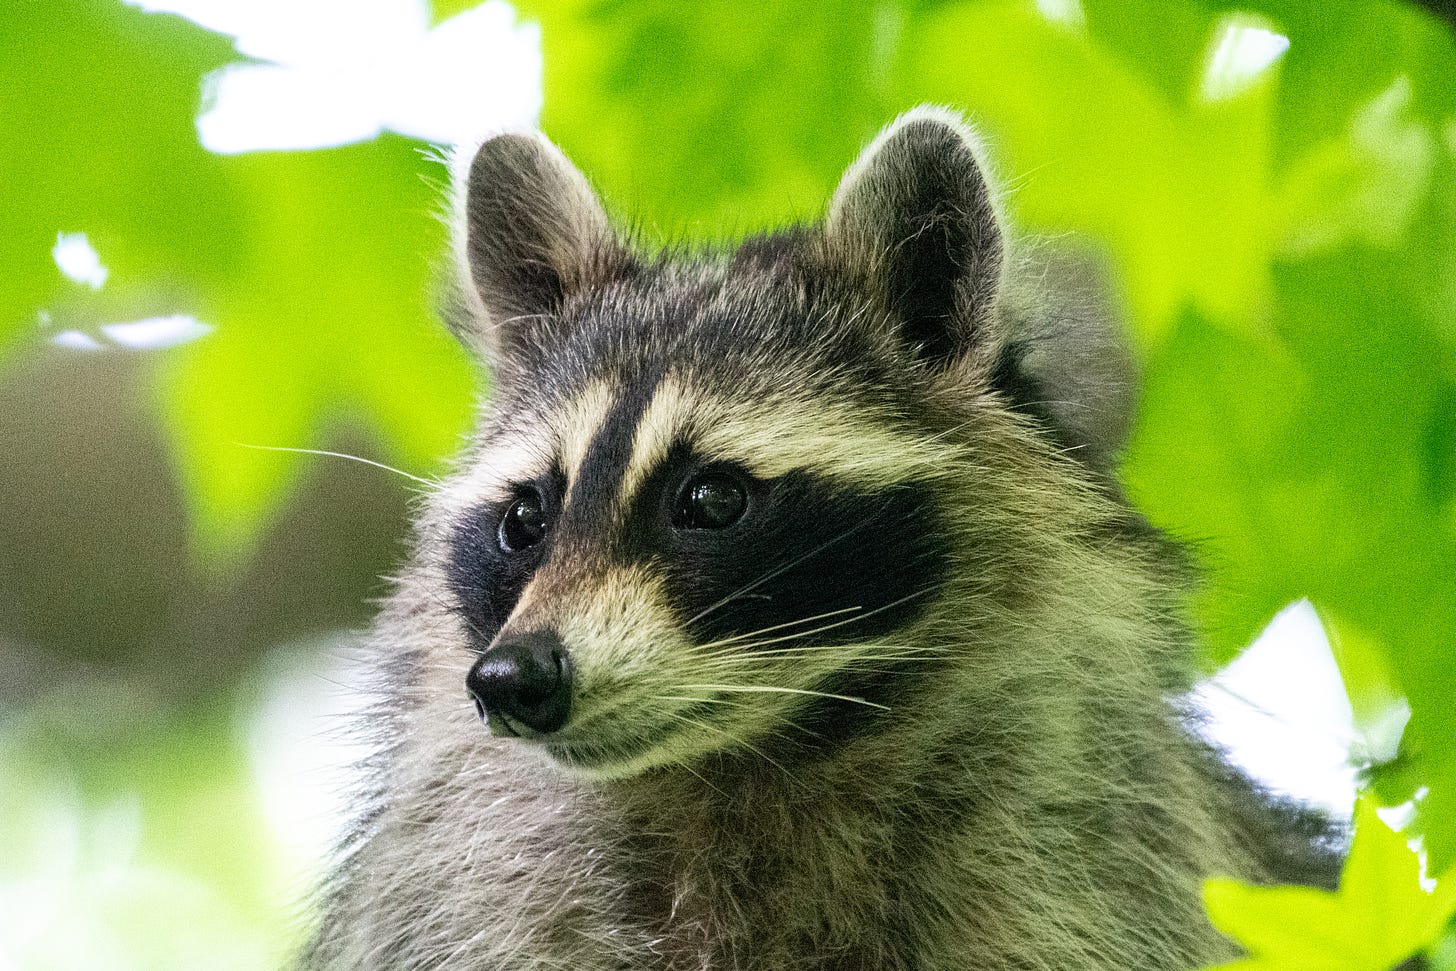 A close-up of a raccoon with a pretty face and a gentle expression